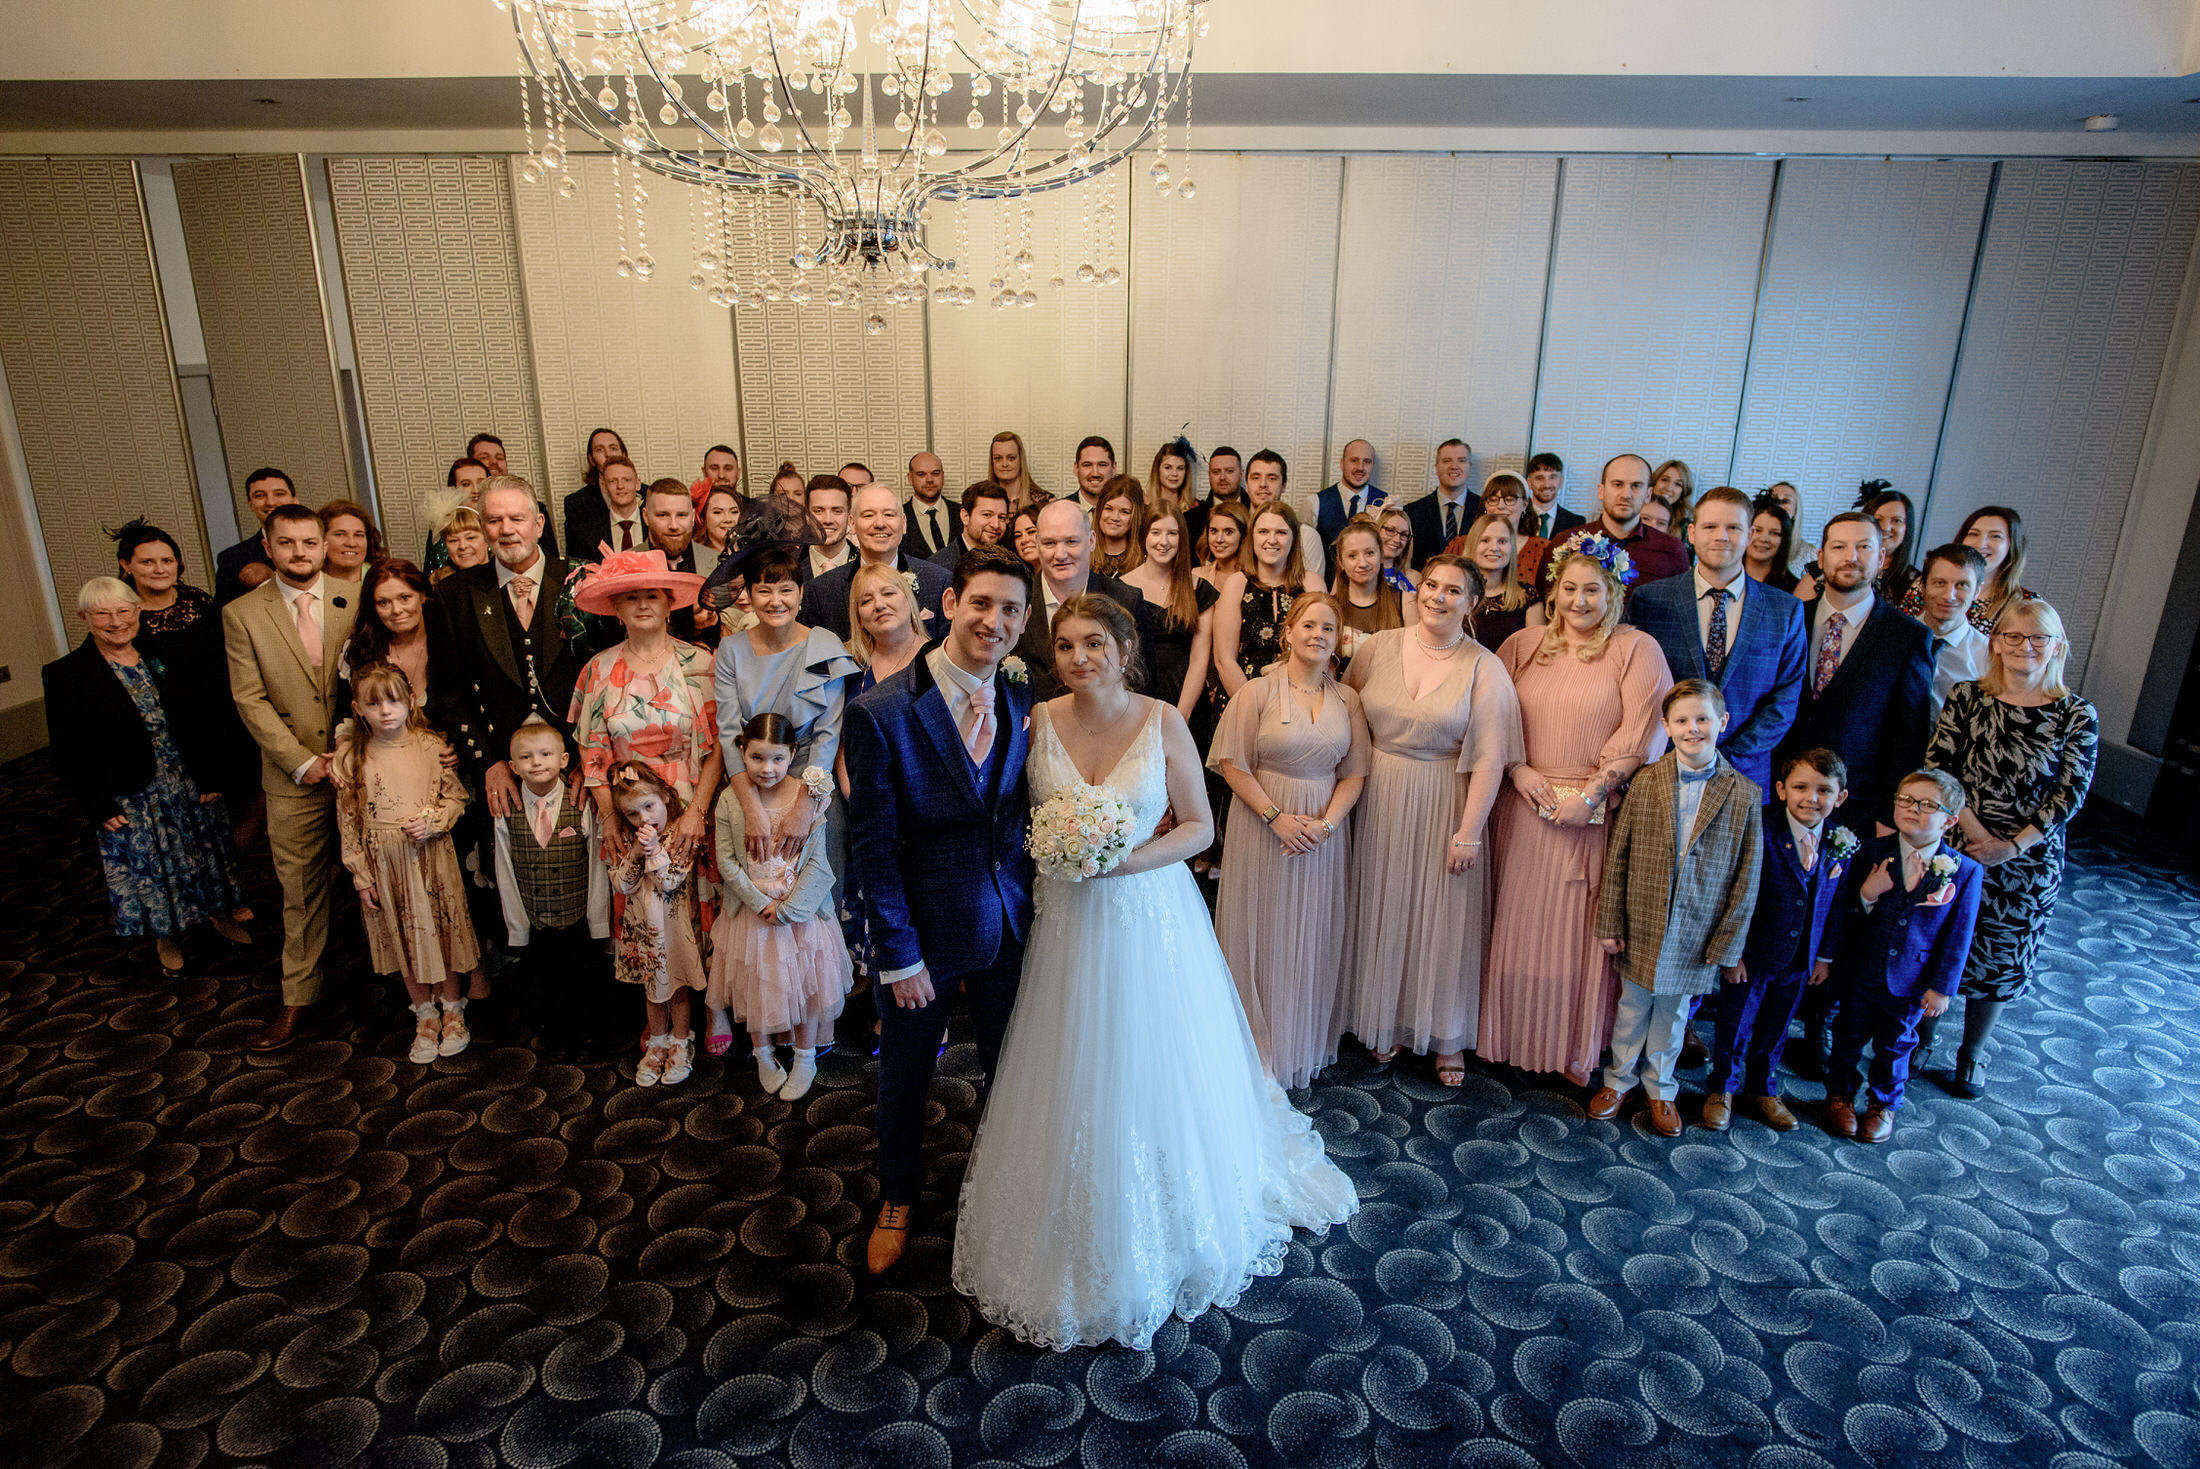 A wedding party posing in front of a chandelier at the Brackenborough Hotel wedding.